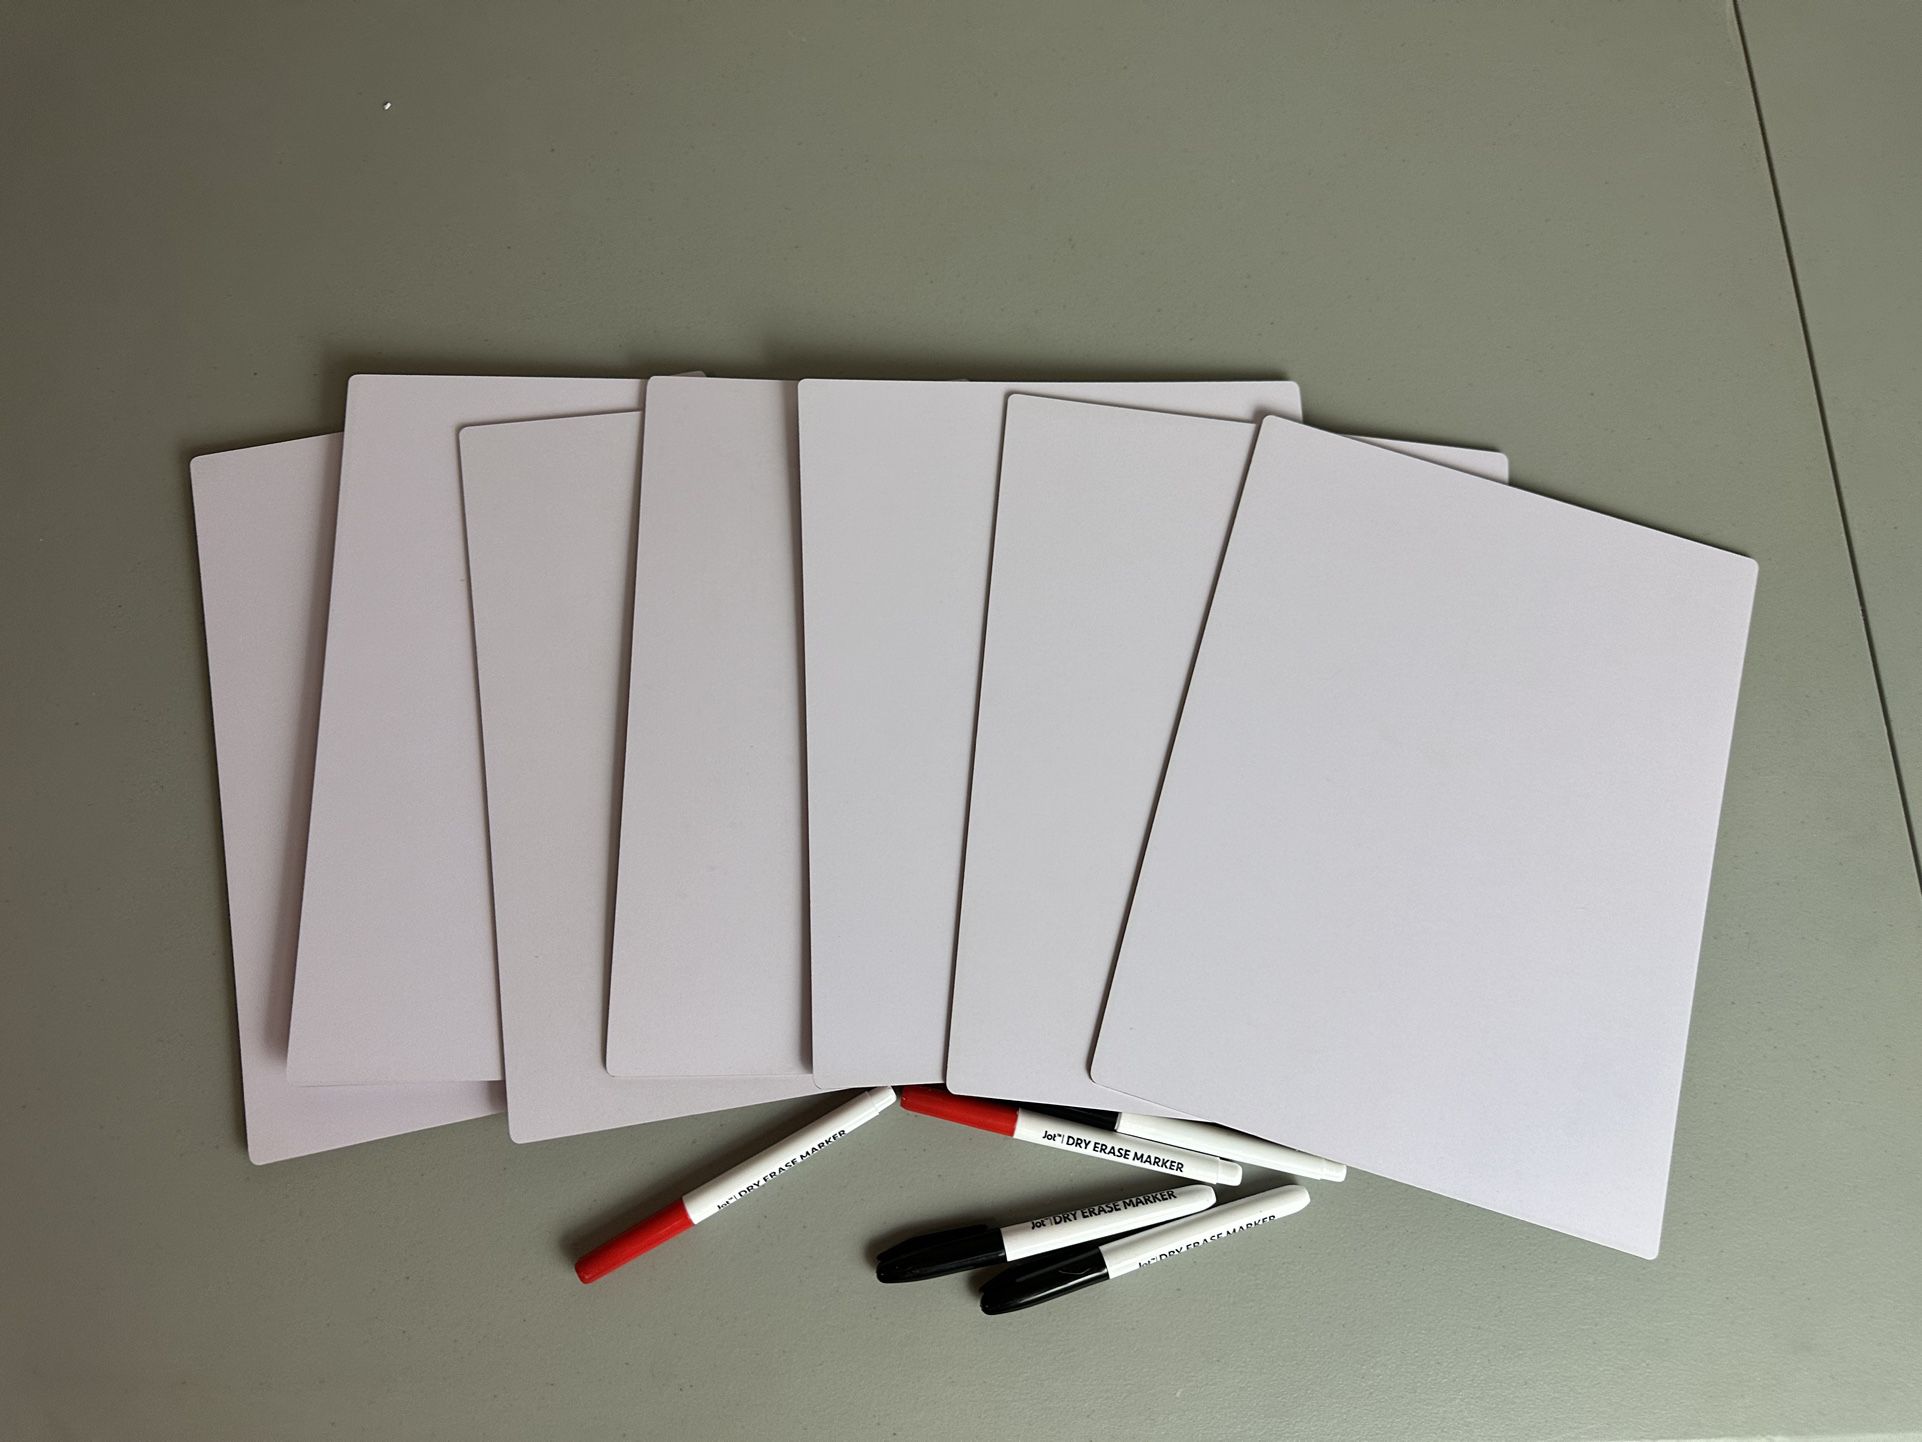 7 new double sided dry erase boards with 5 dry erase markers